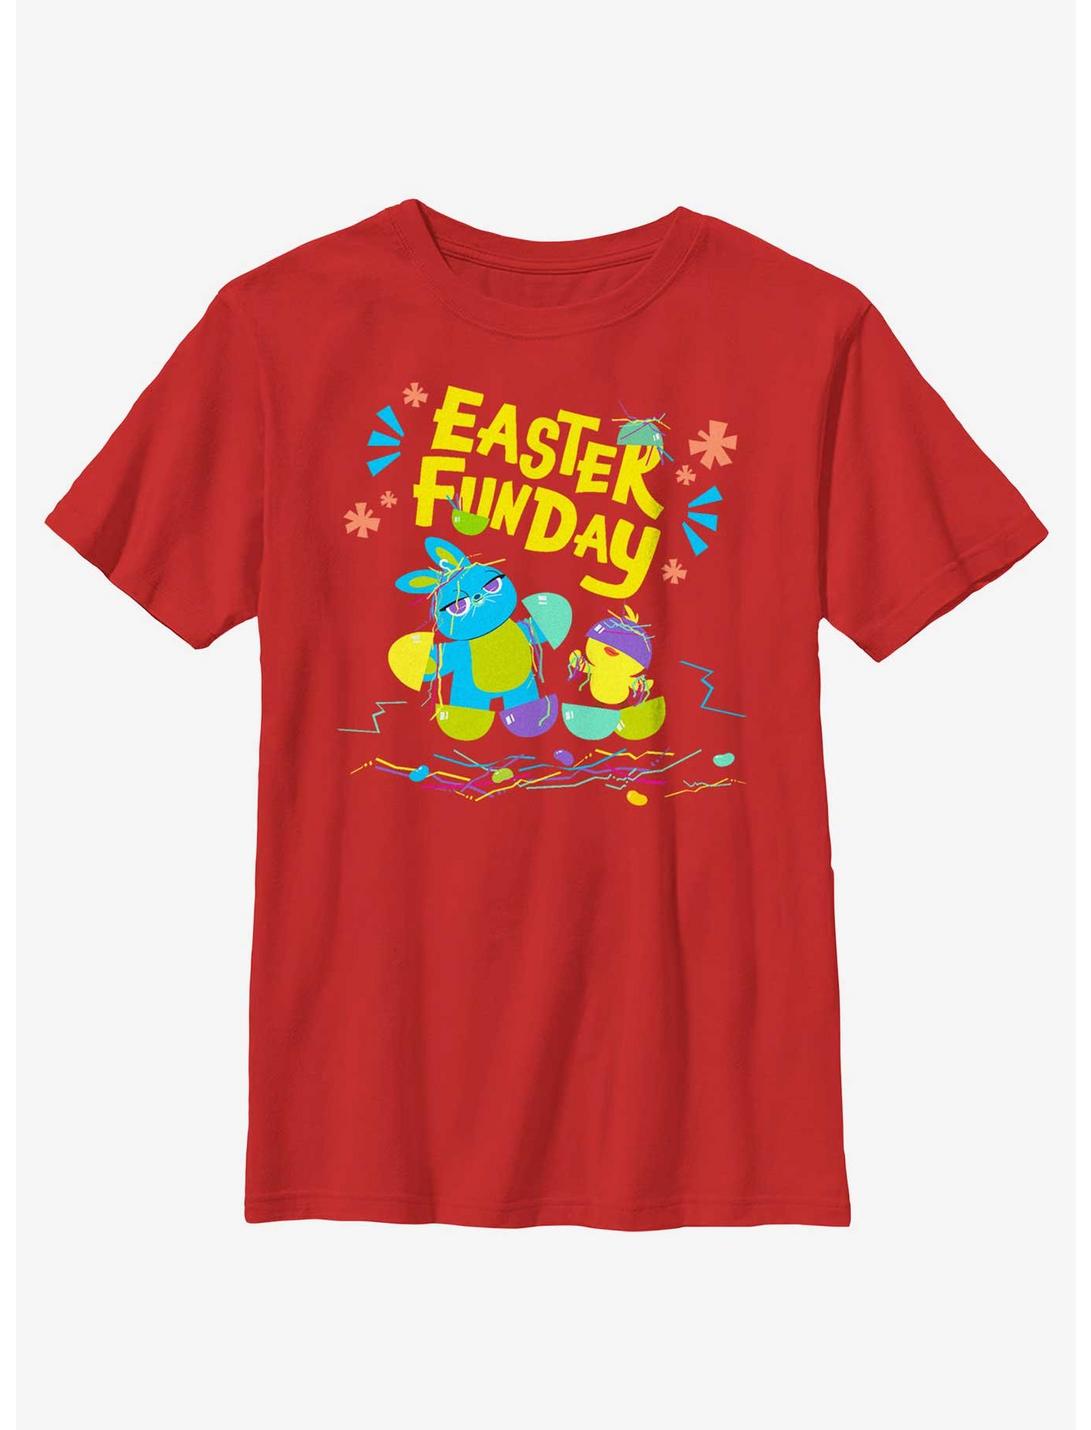 Disney Pixar Toy Story 4 Easter Funday Youth T-Shirt, RED, hi-res